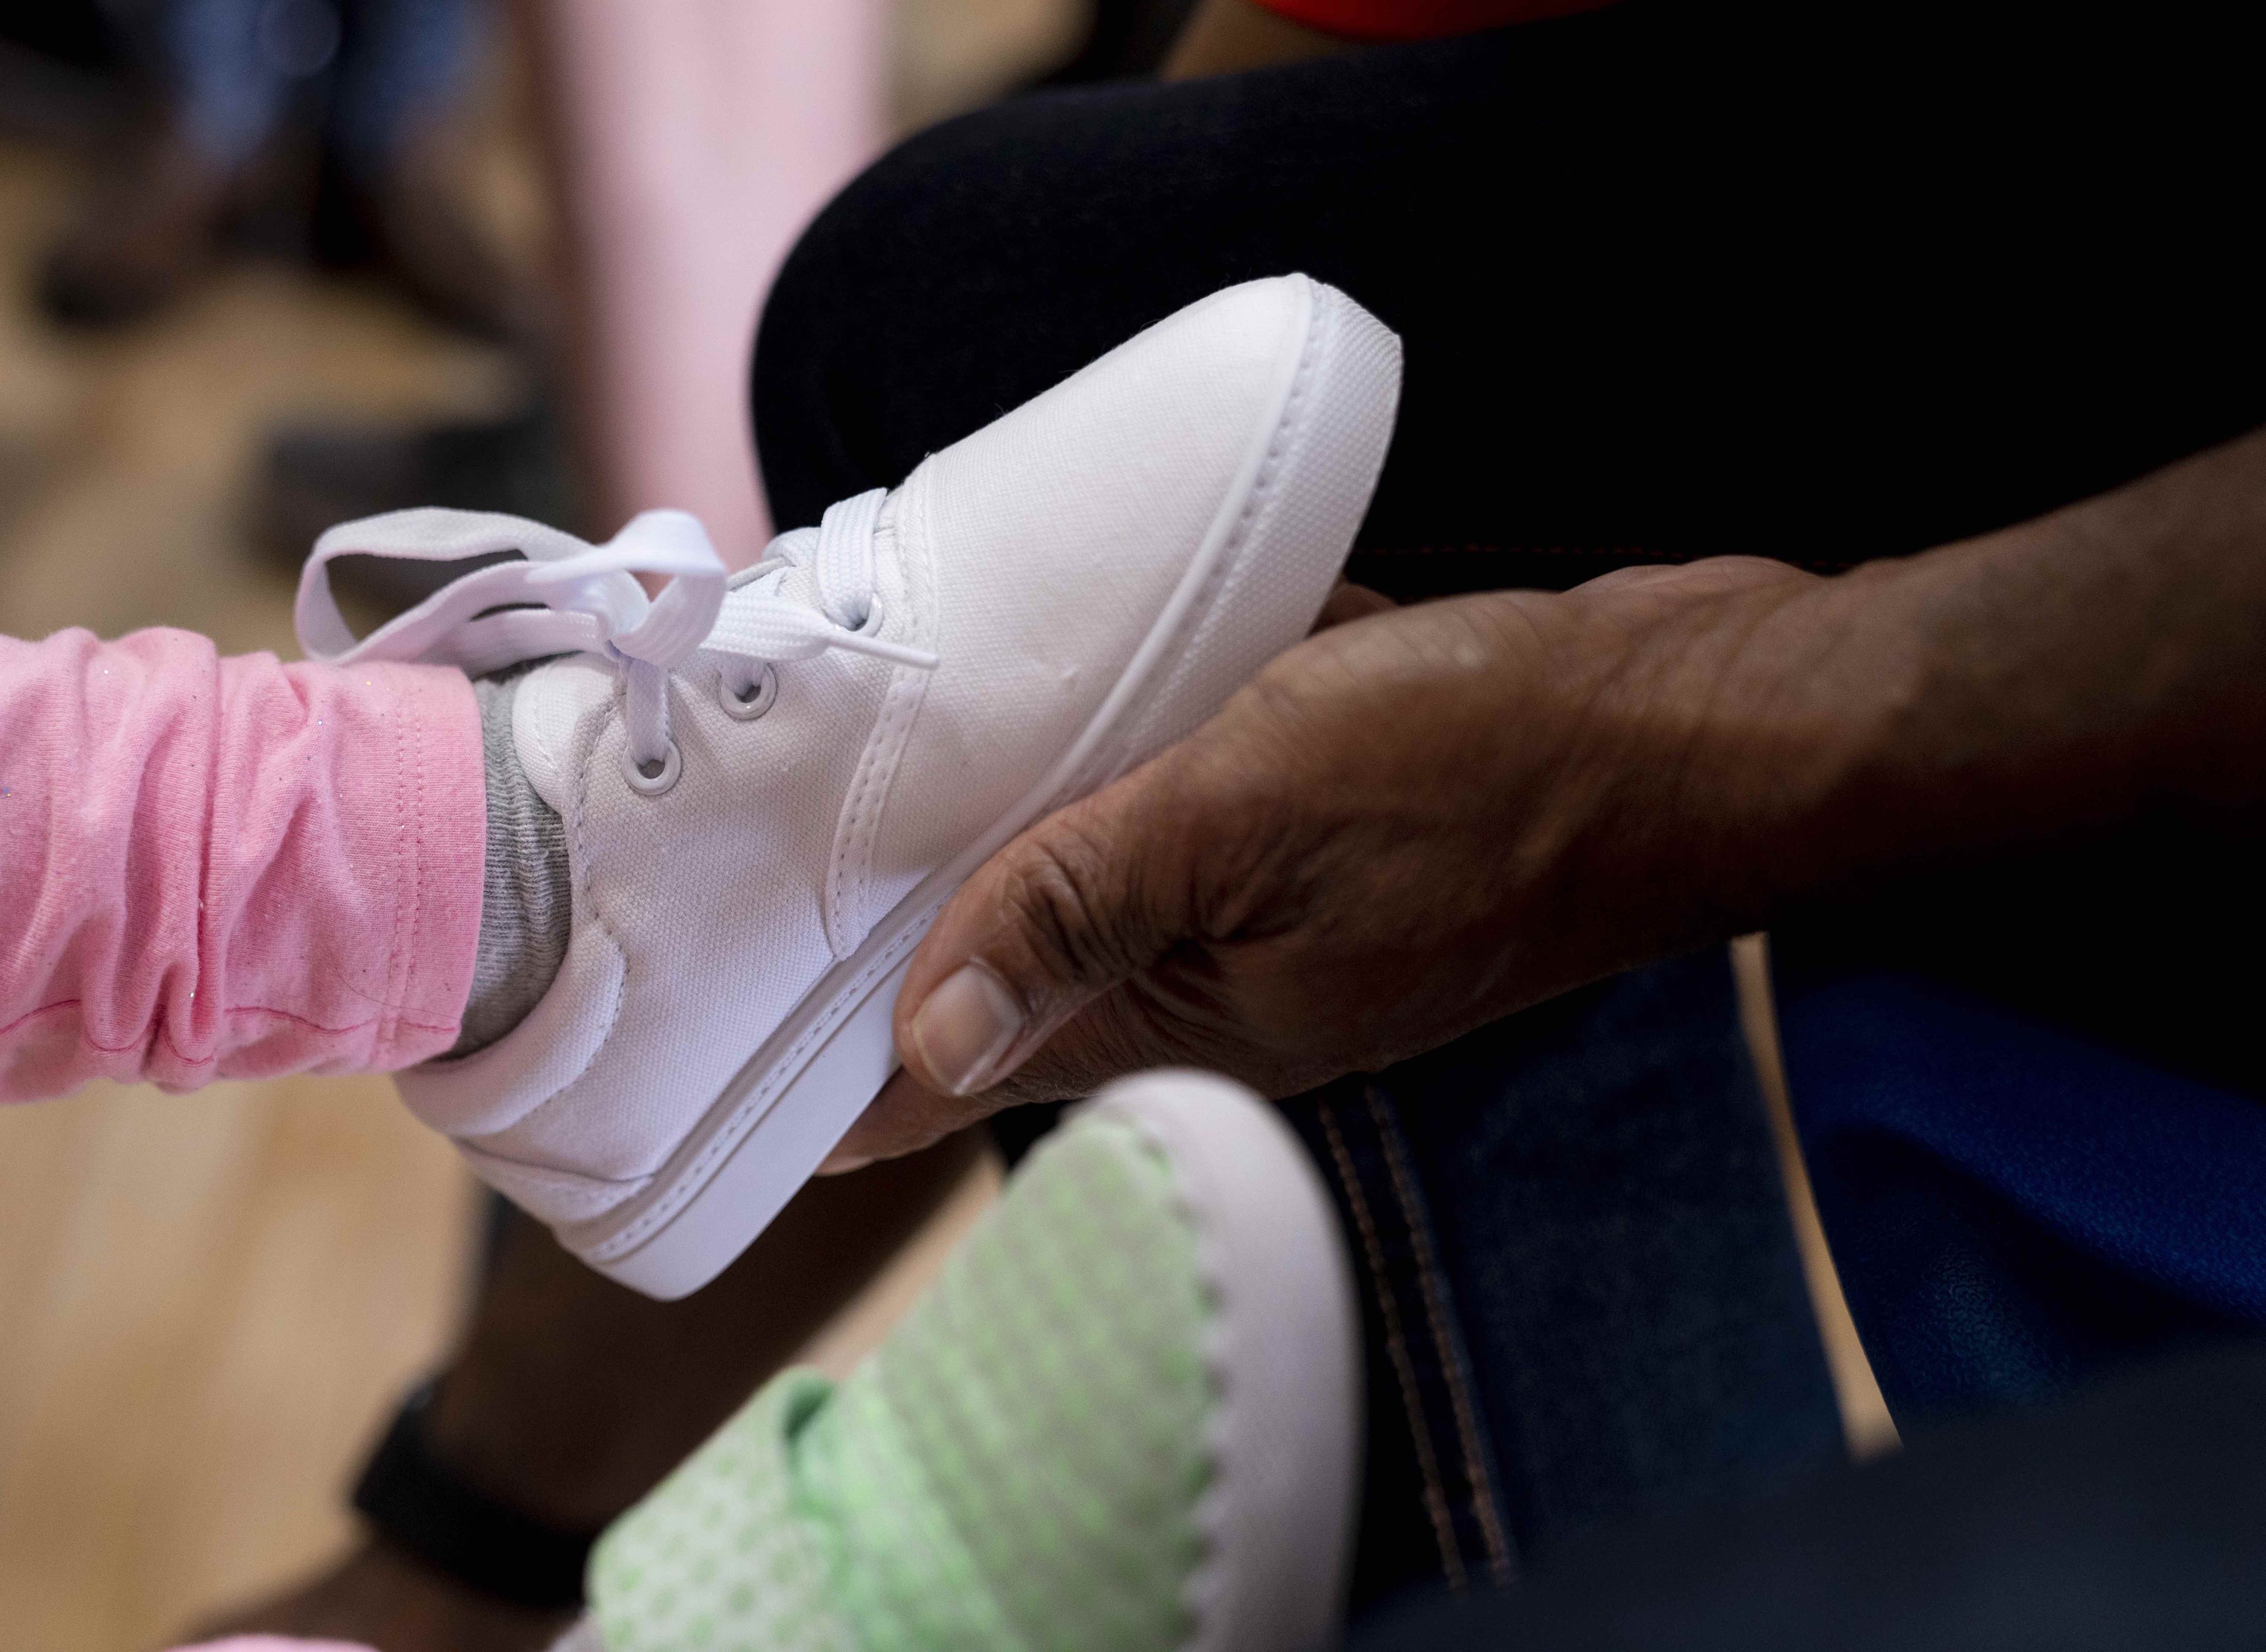 Partnership with non-for-profit organization Soles4Souls means that lightly used sneakers go to those in need